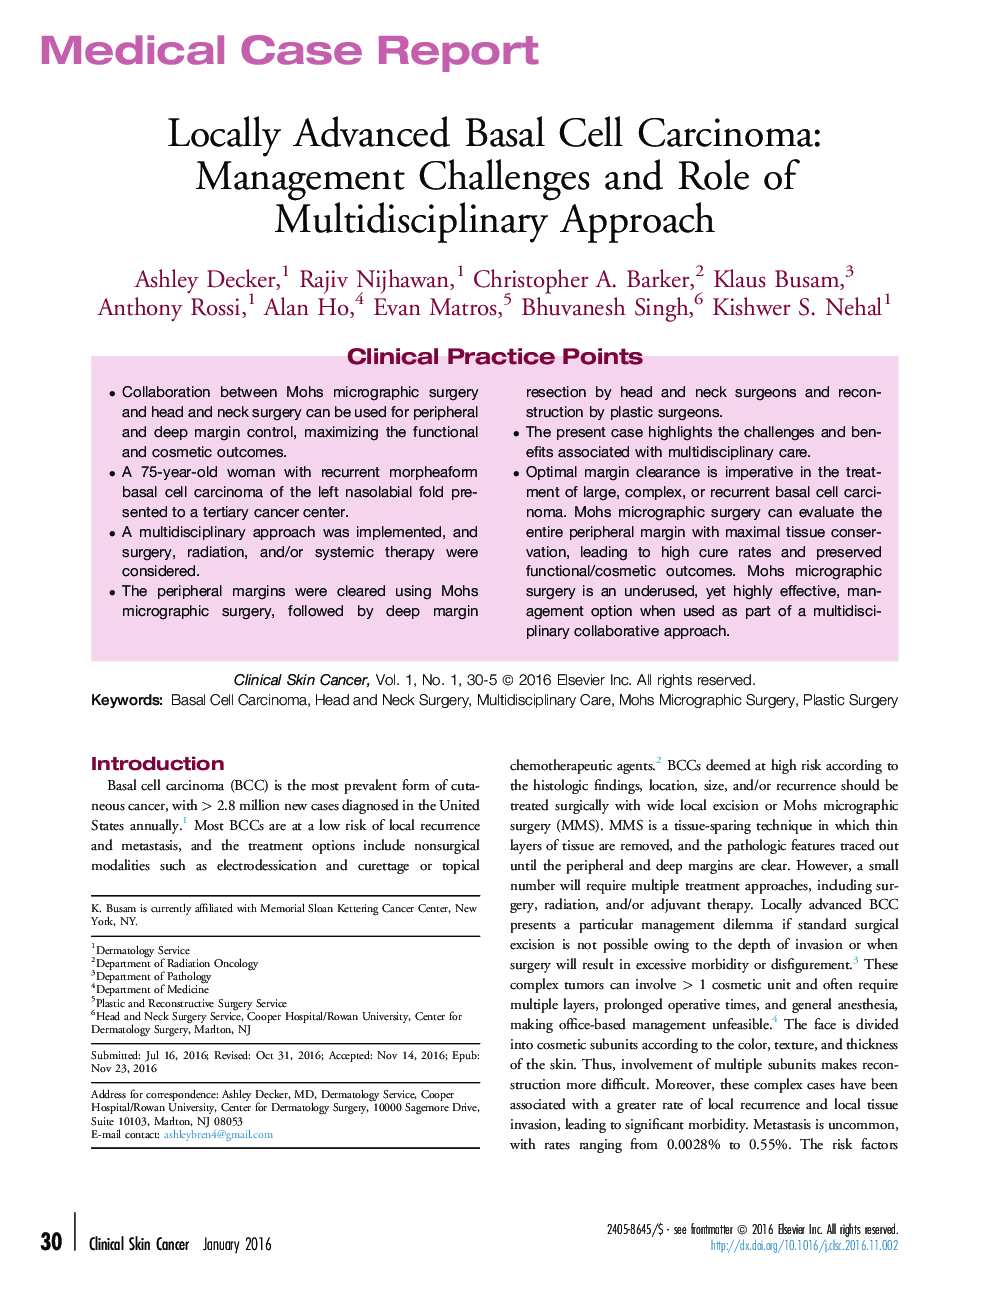 Locally Advanced Basal Cell Carcinoma: Management Challenges and Role of Multidisciplinary Approach